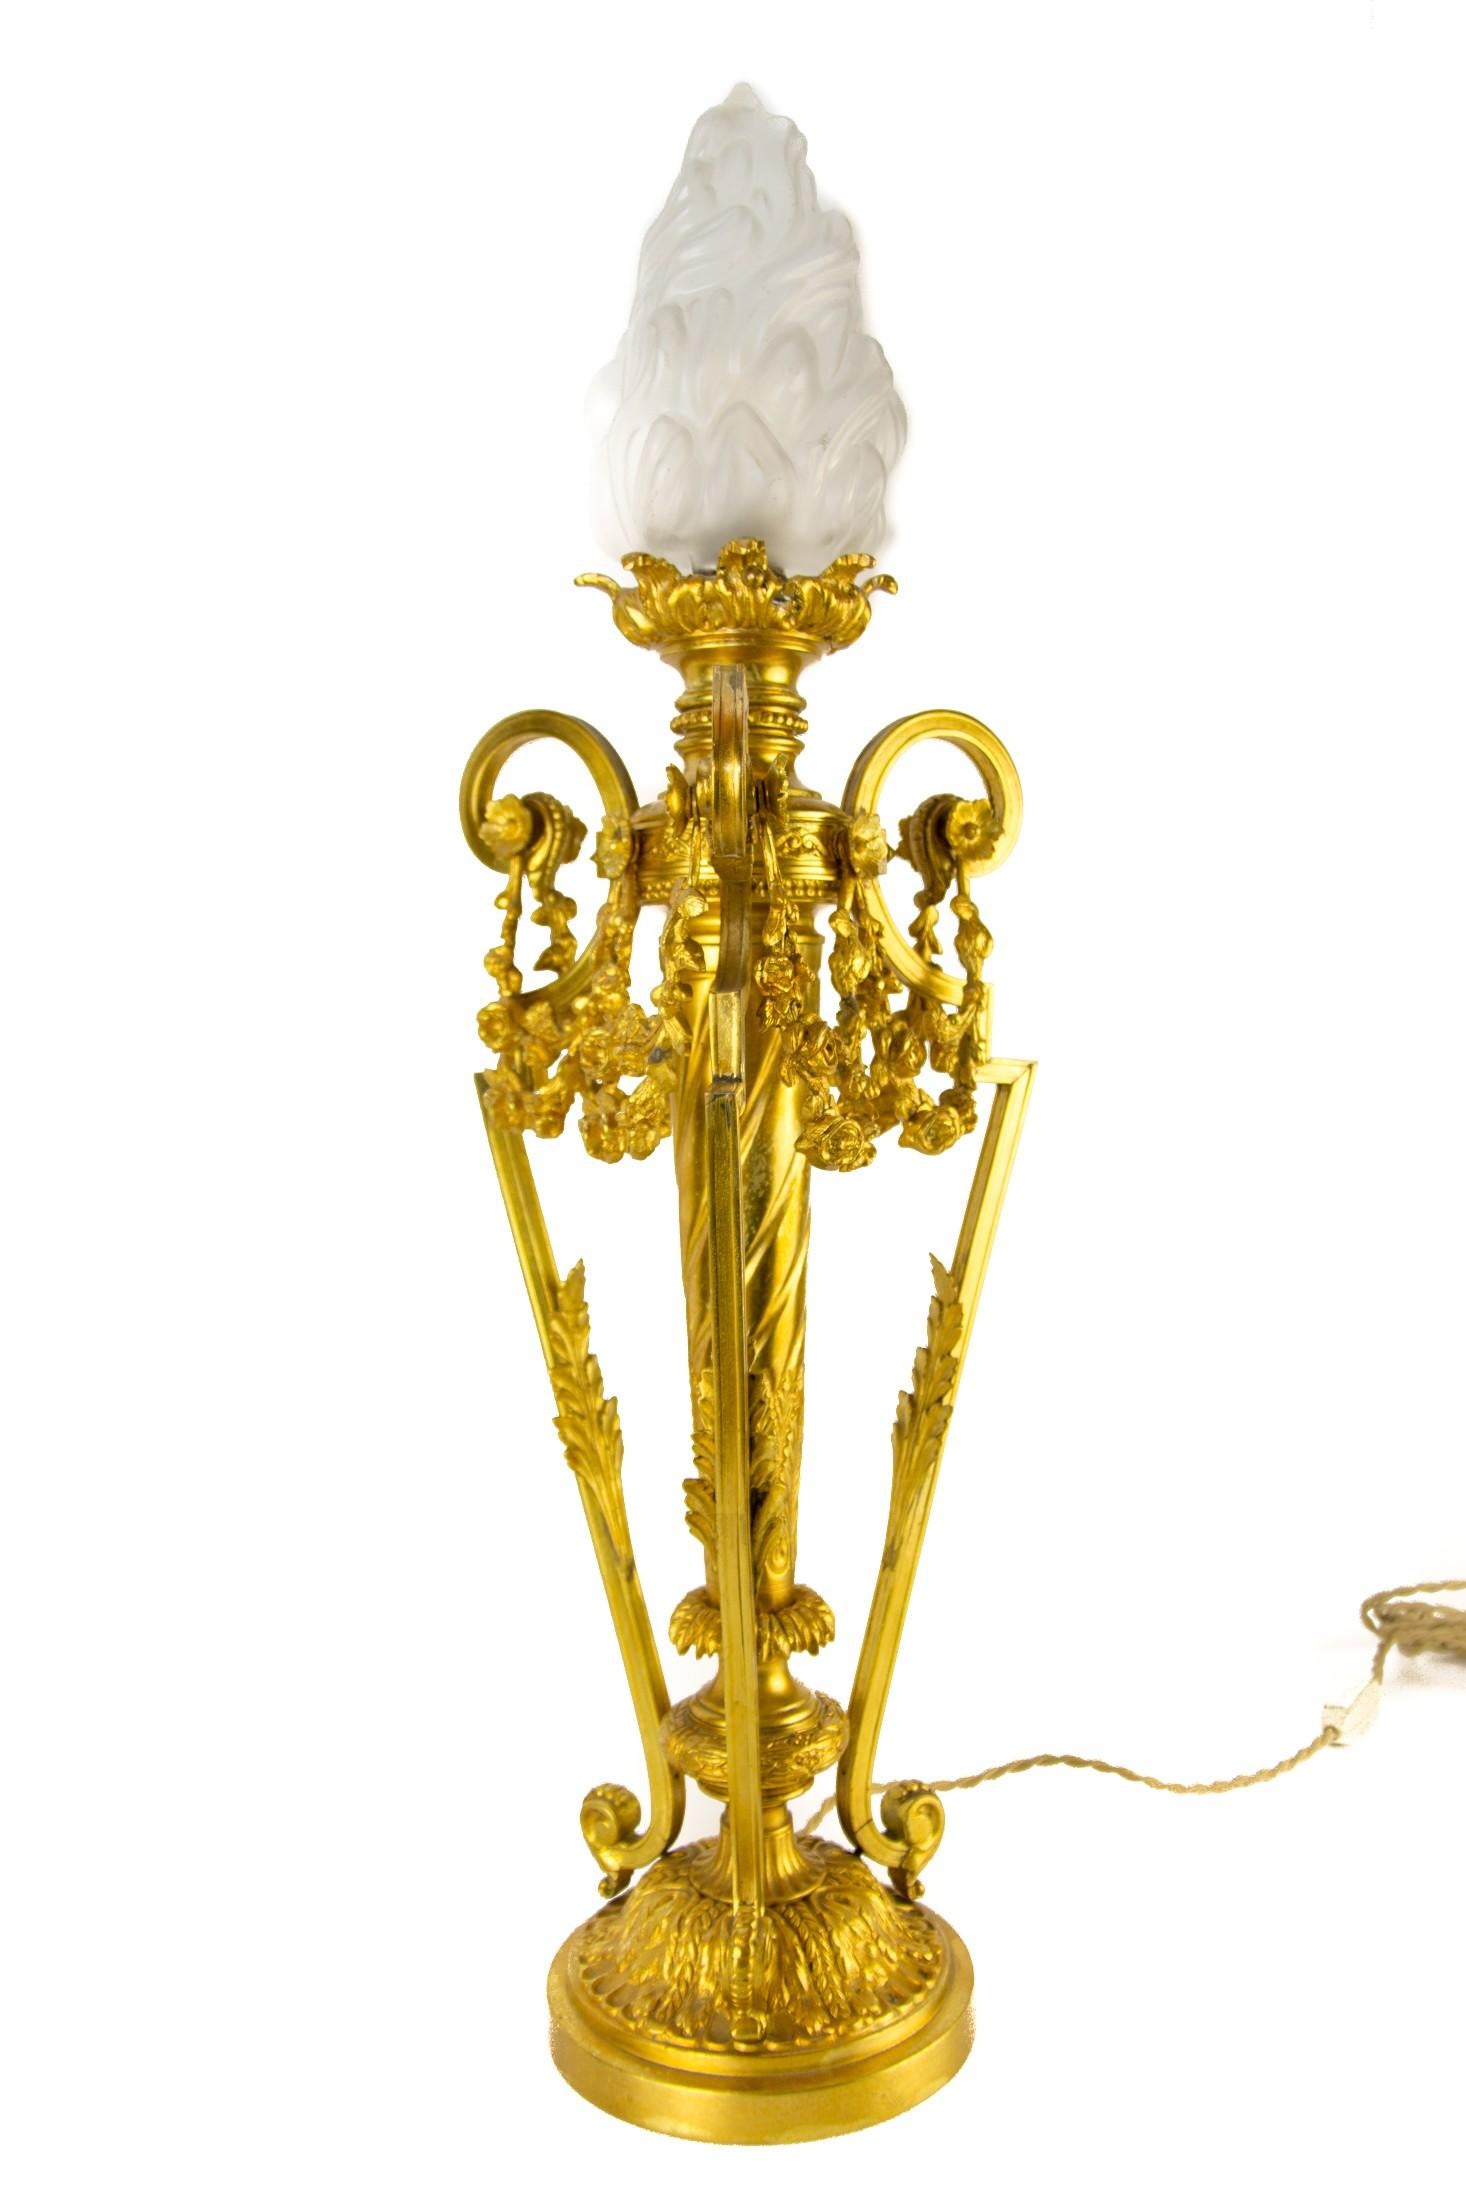 French Louis XVI style gilt bronze newel post lamp with frosted glass flame shade and original E27 socket, France, 1920s.
Richly decorated with bronze decors in a form of acanthus leaves and floral garland drapes.
Generally, in very good